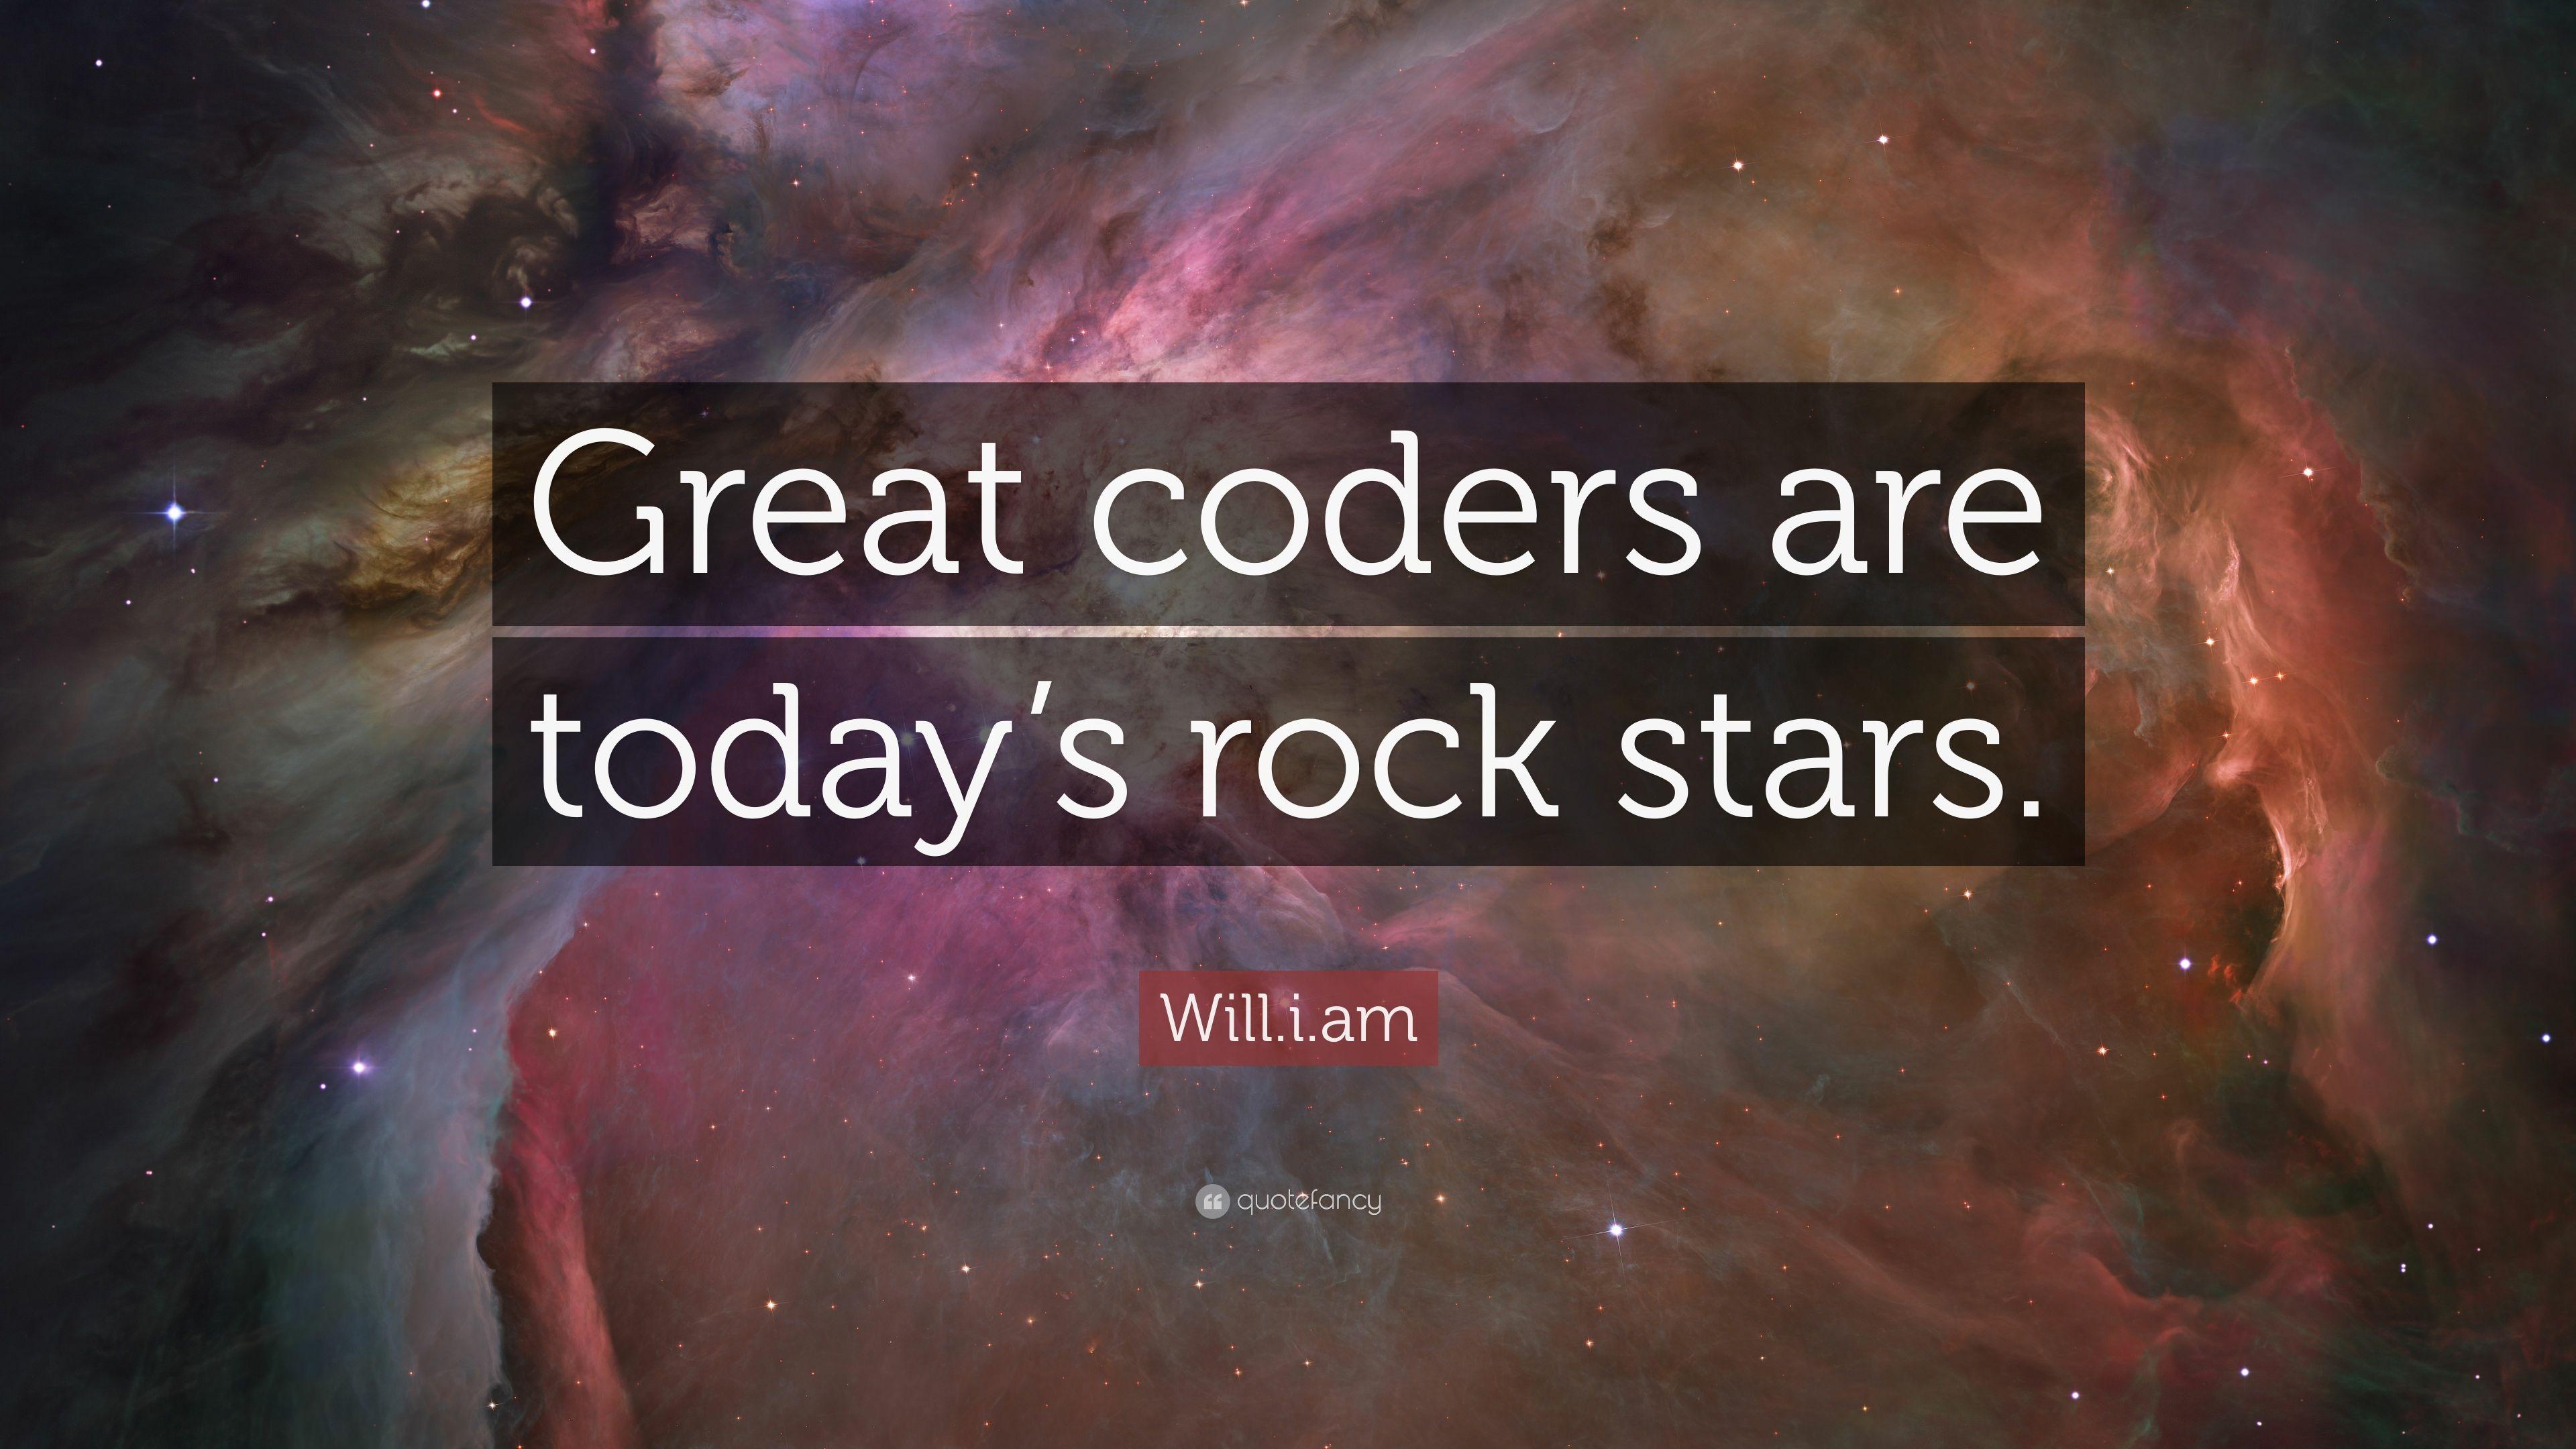 Will.i.am Quote: “Great coders are today's rock stars.” 9